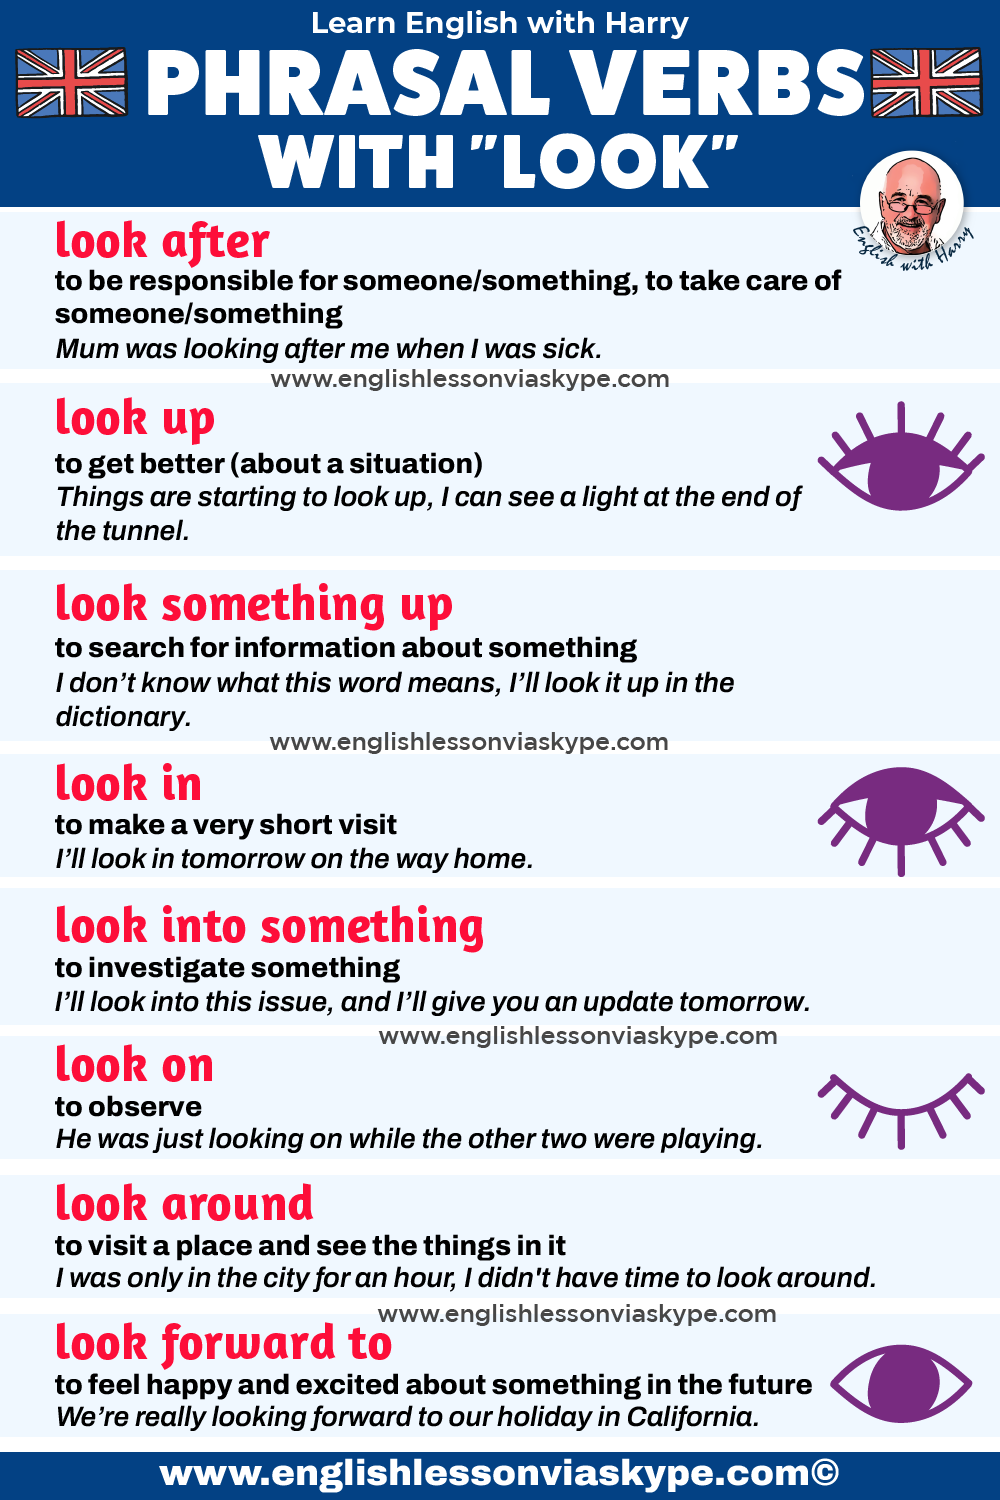 Phrasal verbs with look. Online English lessons on Zoom and Skype. Click the link and book your free trial lesson at englishlessonviaskype.com #learnenglish